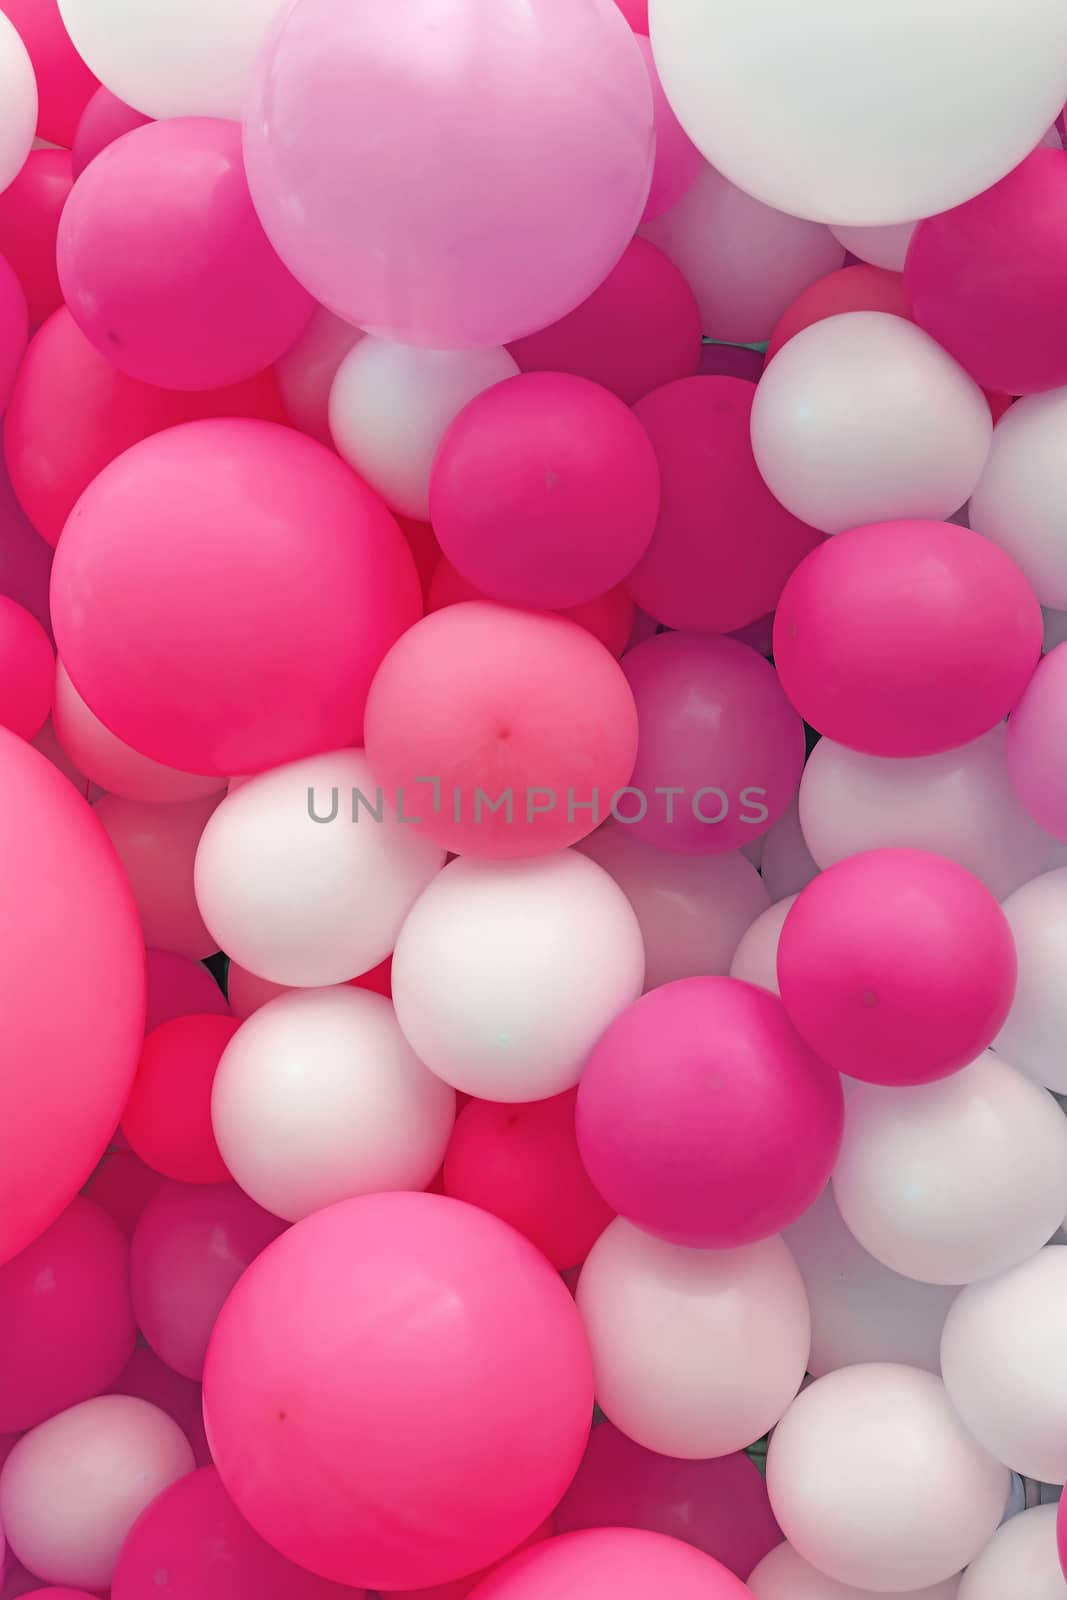 Close up festive background of purple pink and white air balloons of different sizes